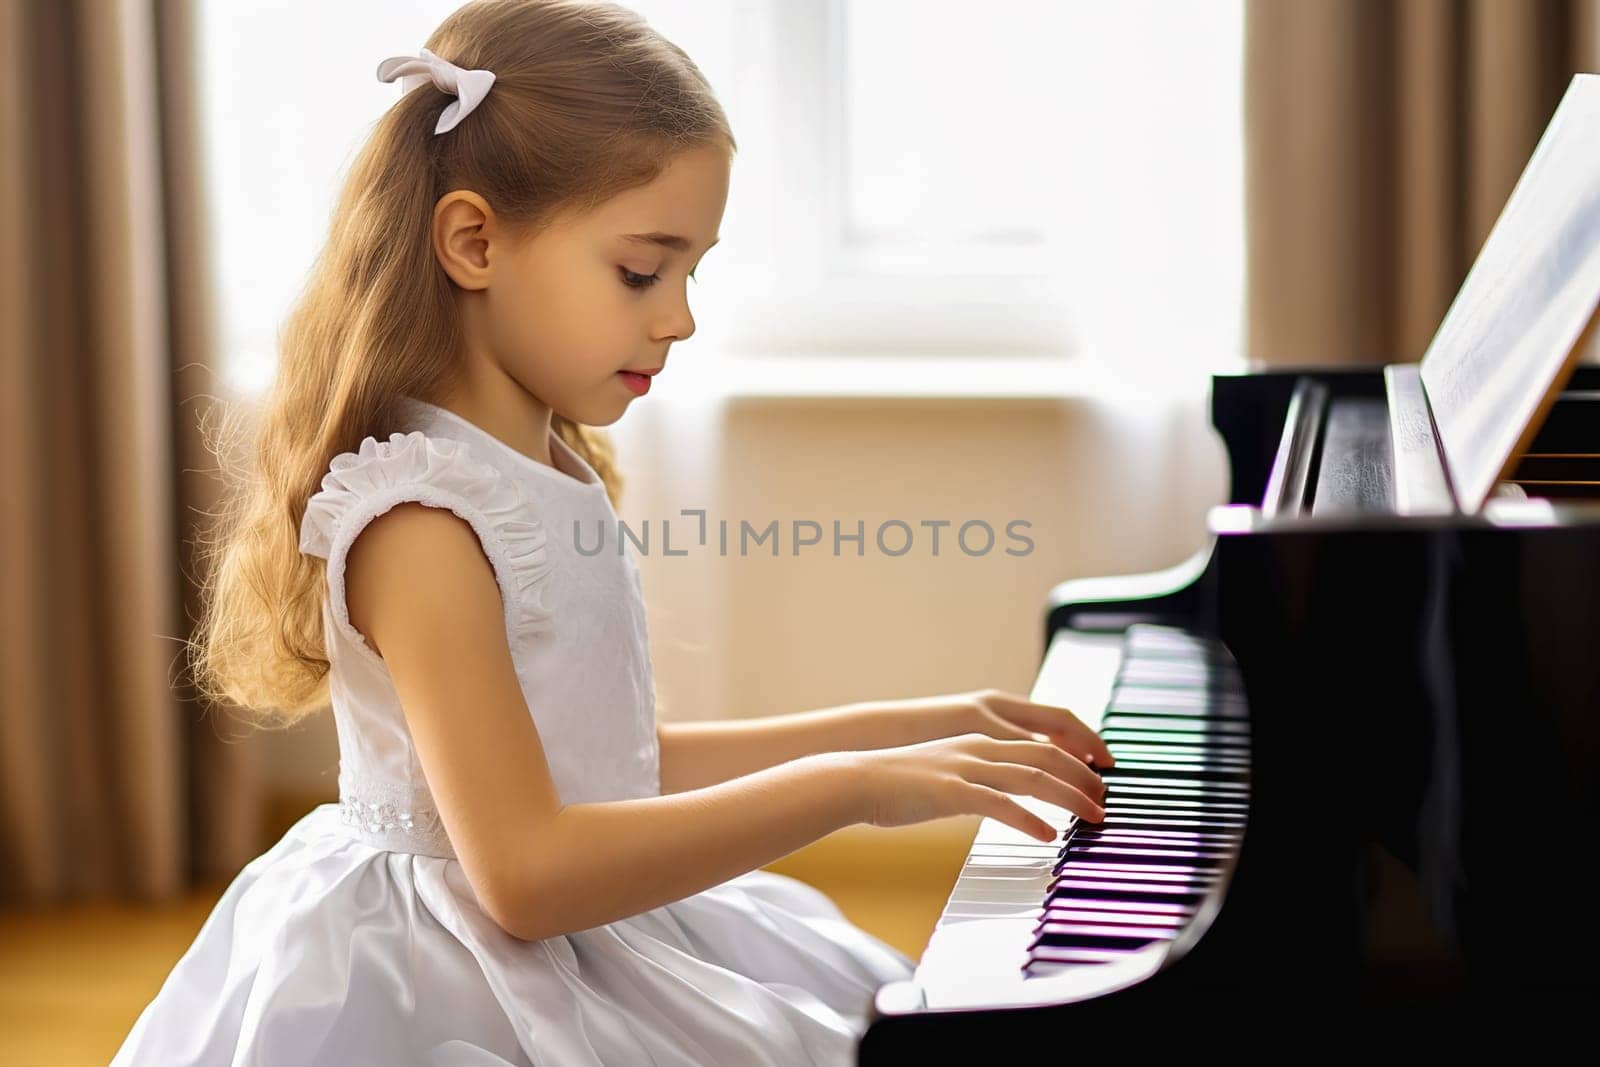 A little girl with long hair is learning to play the piano. by Yurich32